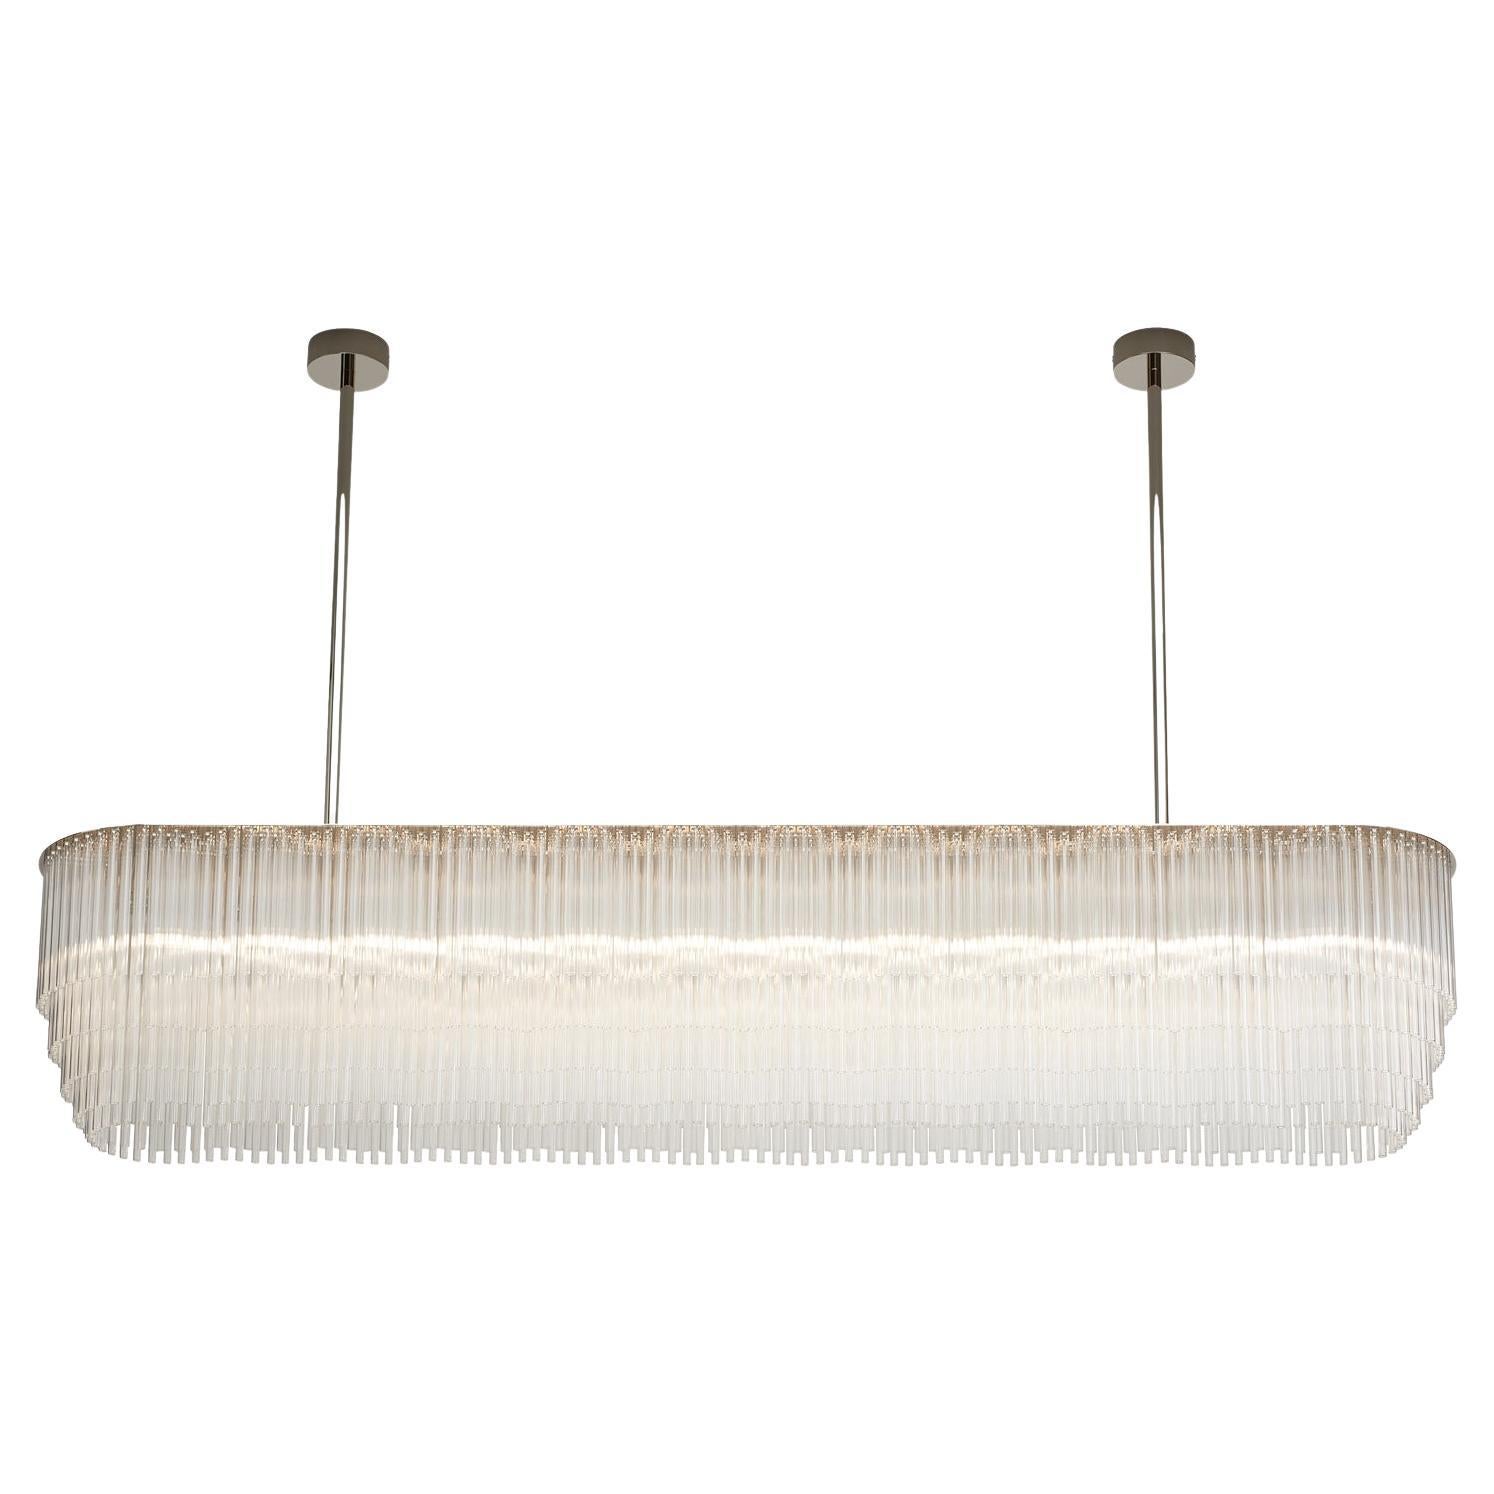 Linear Chandelier 1697mm / 66.75" in Polished Chrome with Tiered Glass Profile For Sale